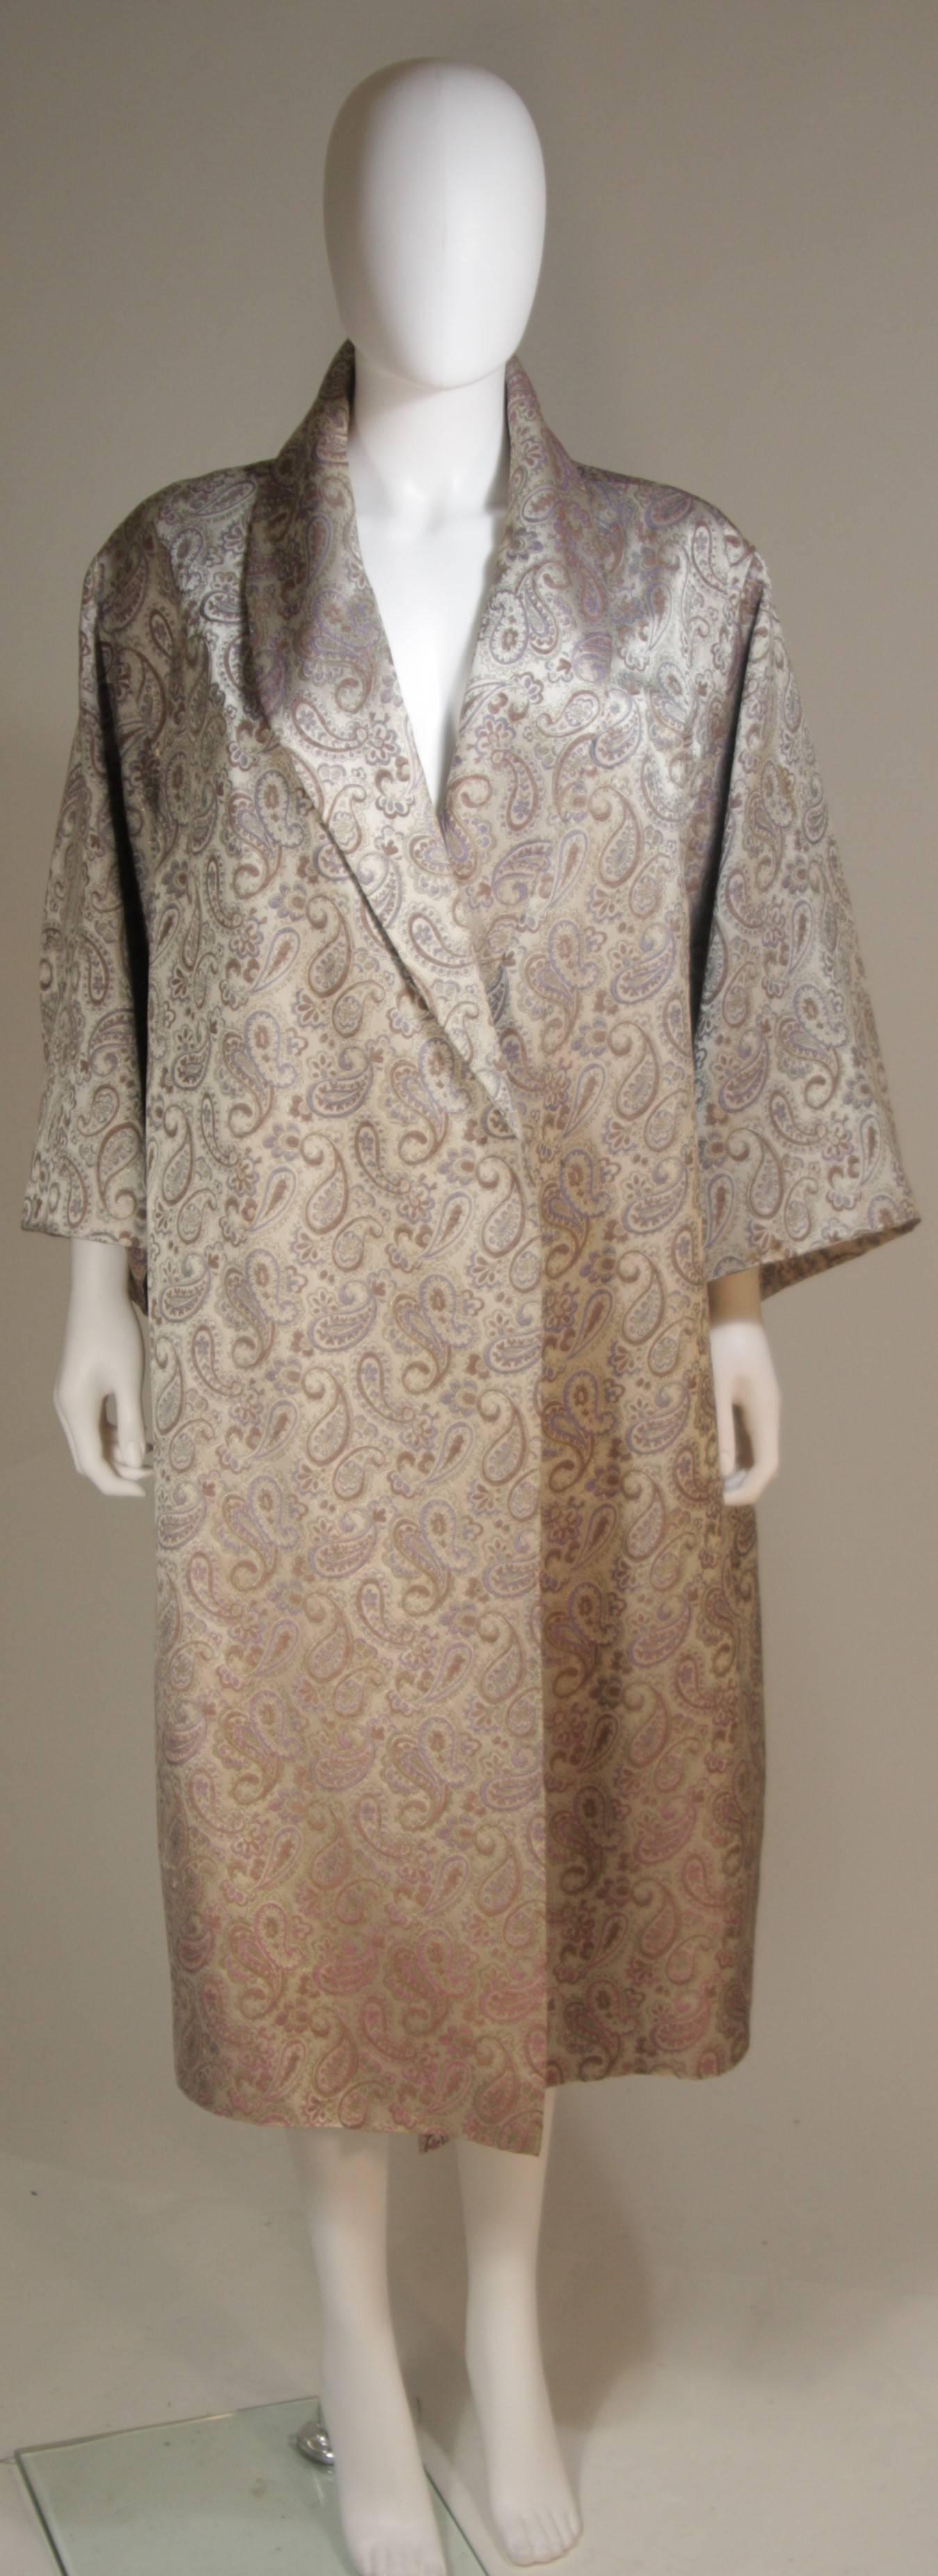  This Vintage coat is composed of a silk paisley print fabric in silver, mauve, and periwinkle. The coat has an open style design. In excellent vintage.

  **Please cross-reference measurements for personal accuracy. Size in description box is an